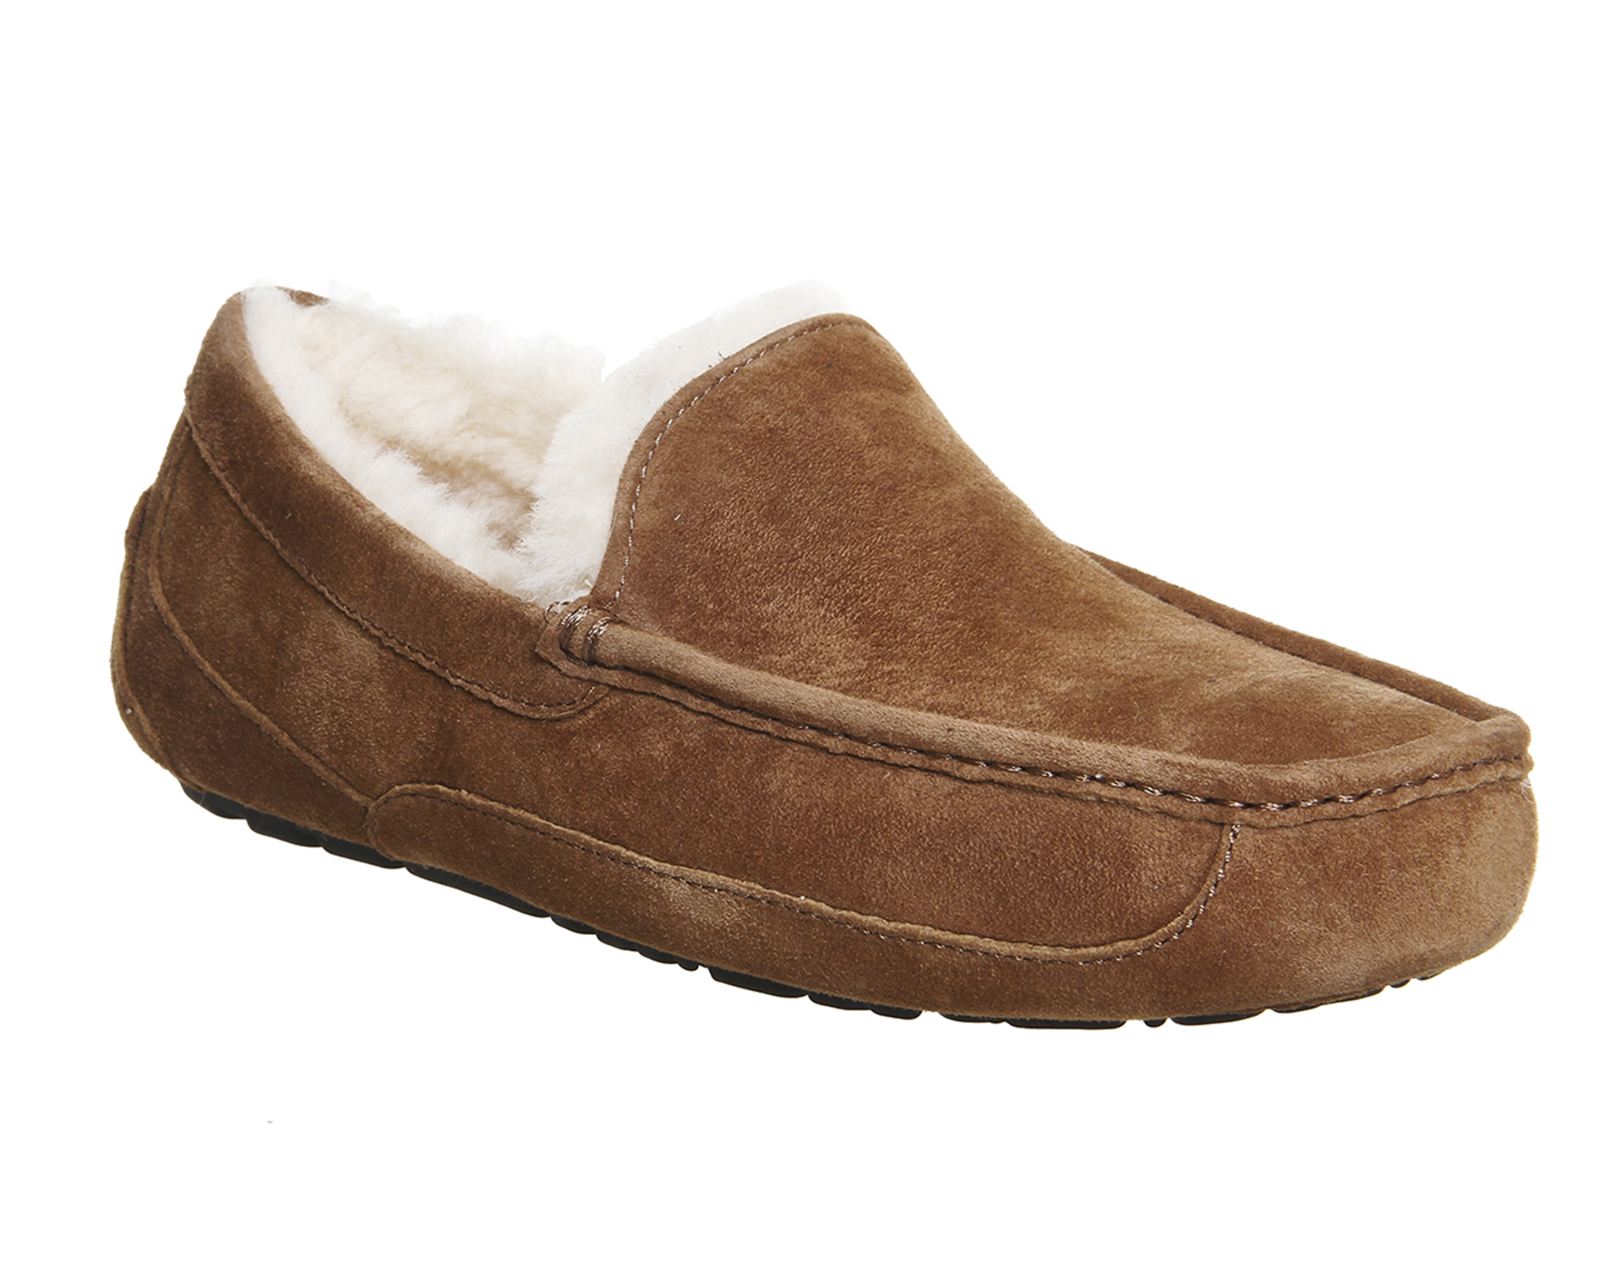 Ugg Ascot Slippers Size 9 Online Store, UP TO 66% OFF | www.apmusicales.com